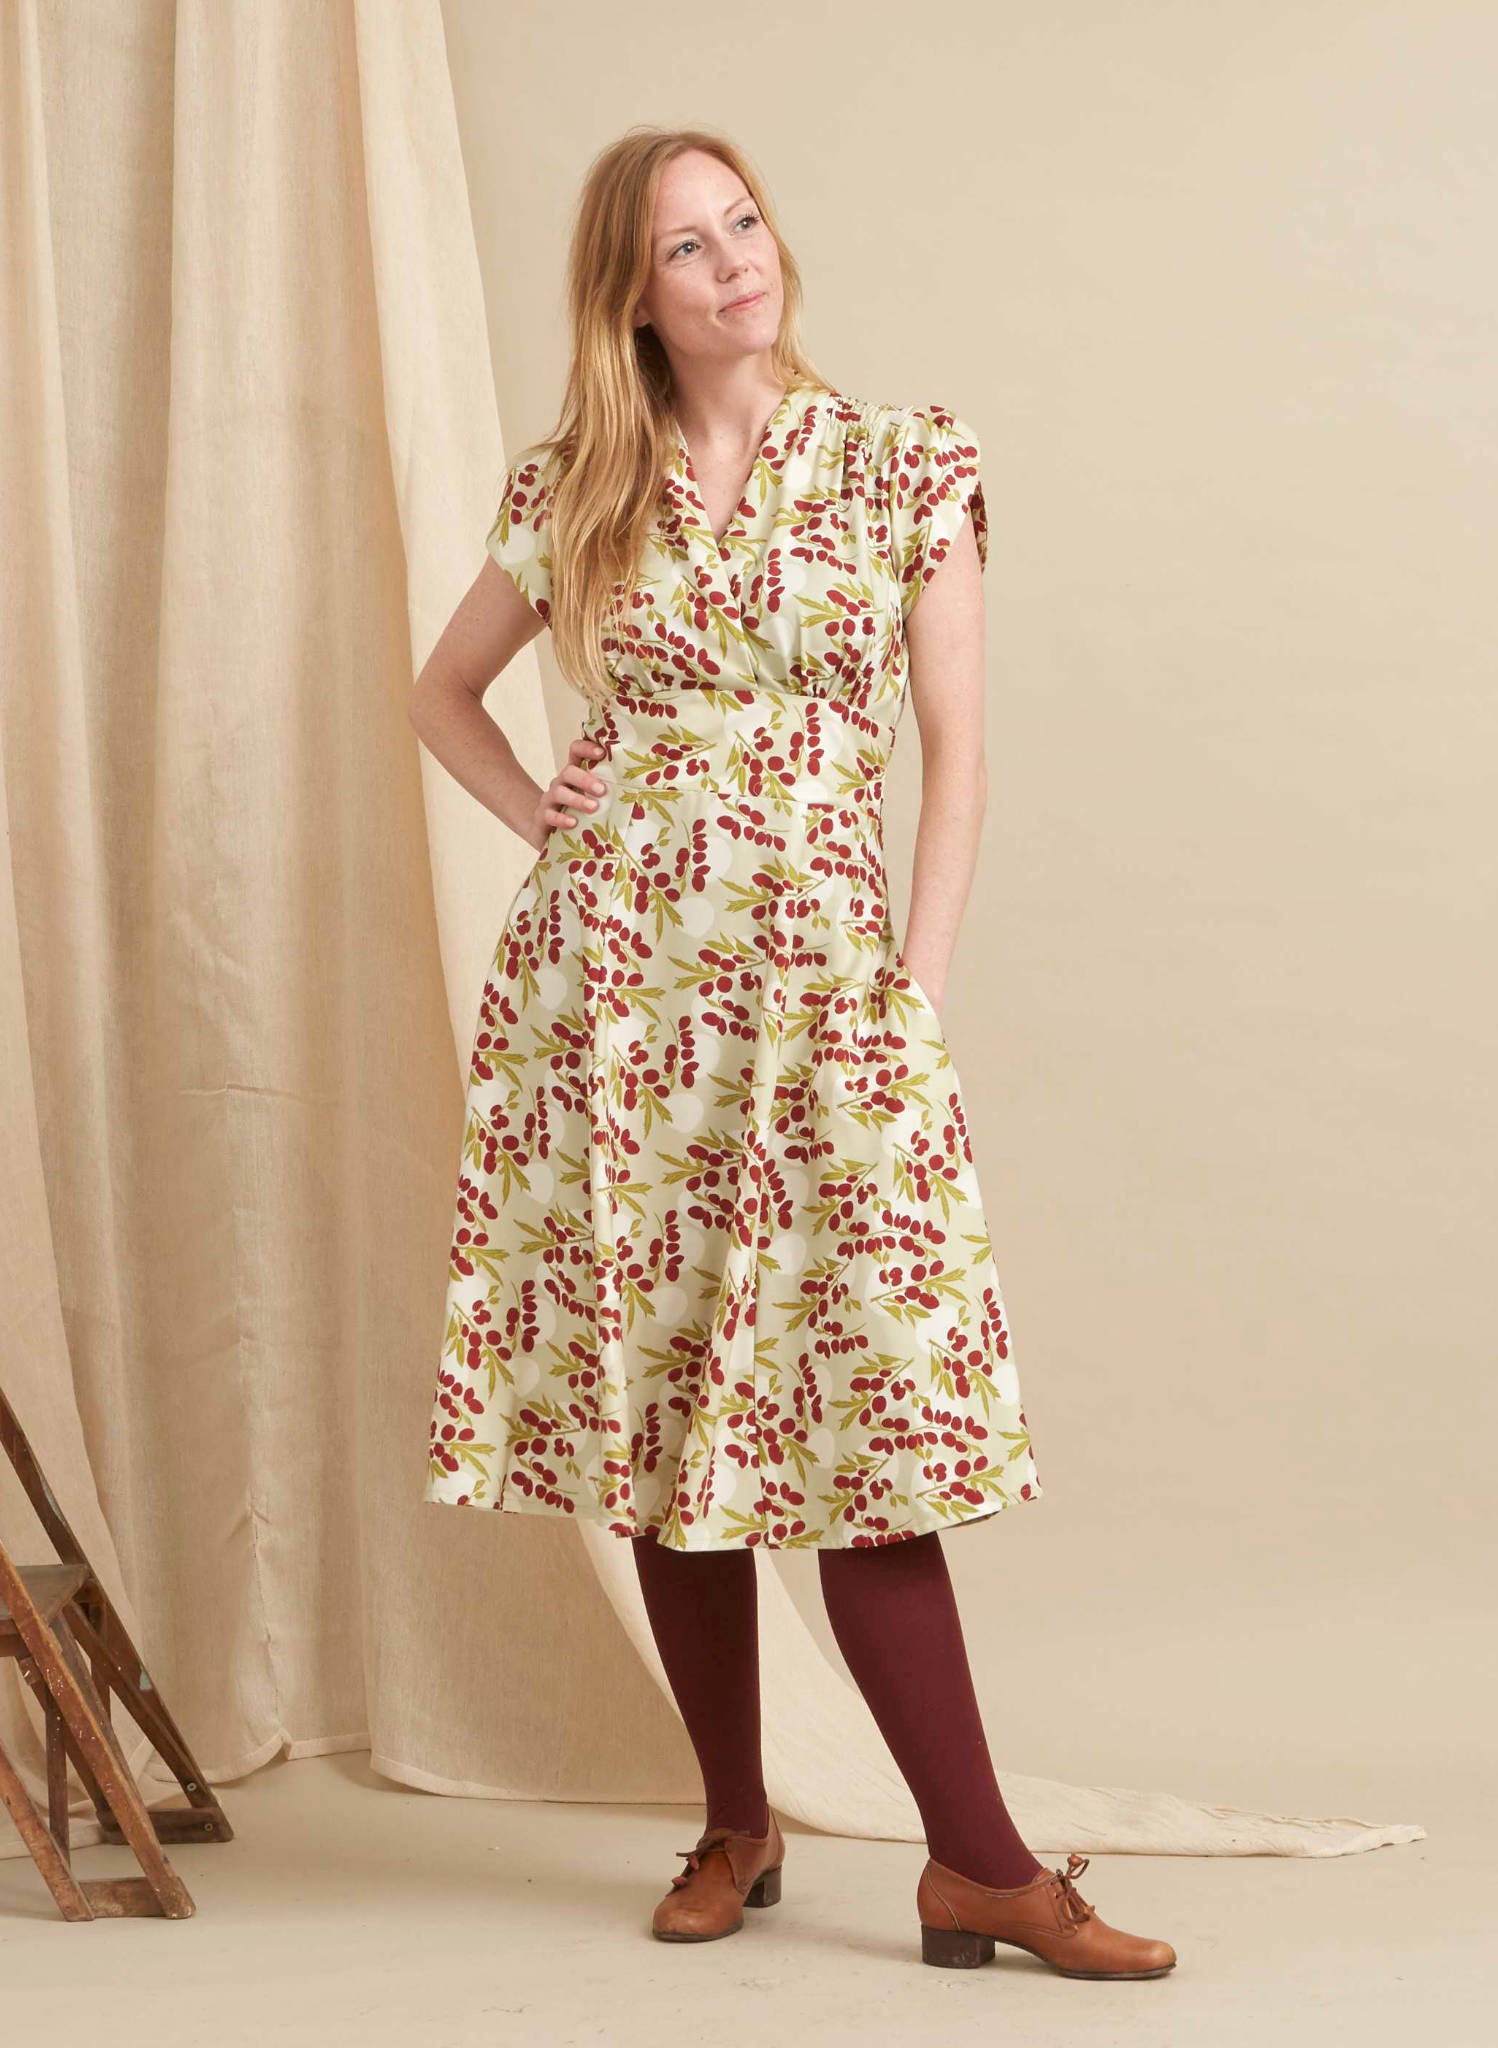 Short sleeve 1940s style mid length dress with colourful print of damson in dark red, green and white